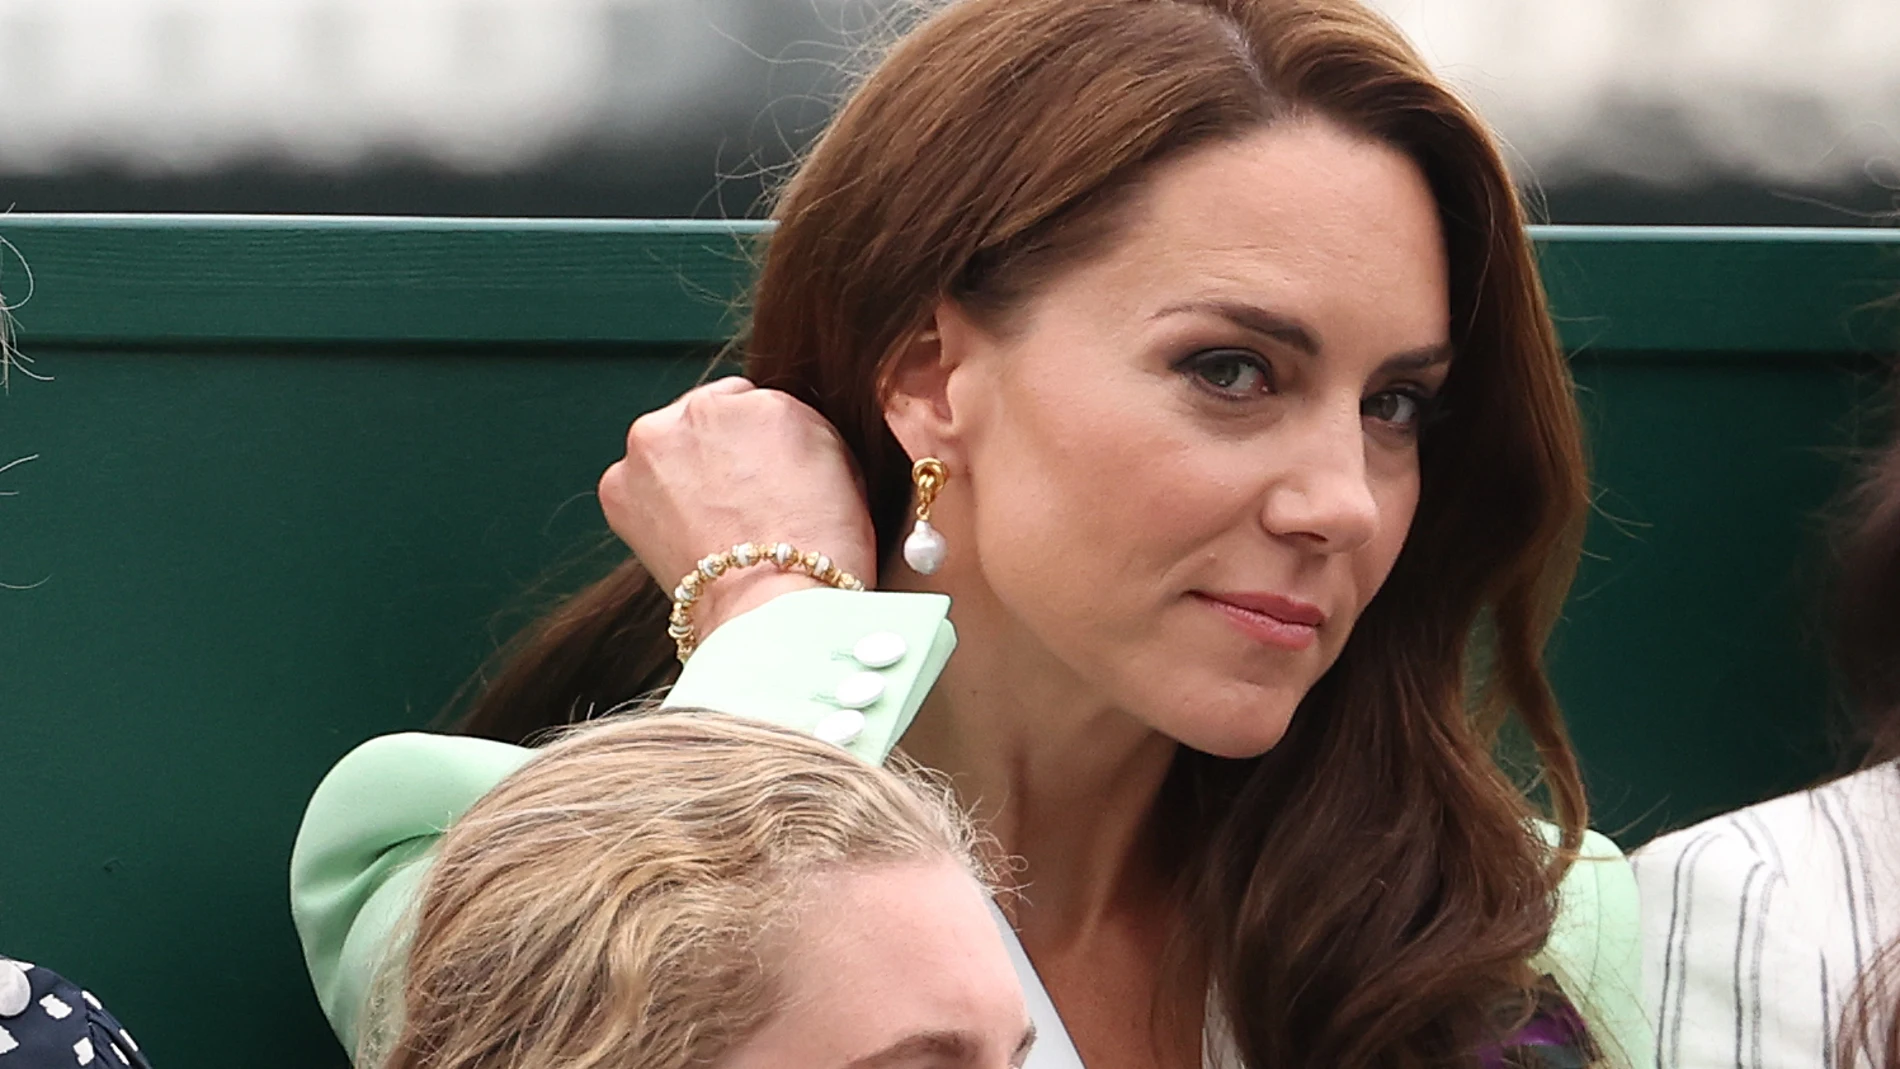 July 4, 2023, Wimbledon, London, England: 4th July 2023; All England Lawn Tennis and Croquet Club, London, England: Wimbledon Tennis Tournament; HRH the Princess of Wales Kate Middleton watches the match between Katie Boulter and Daria Saville (Foto de ARCHIVO)04/07/2023